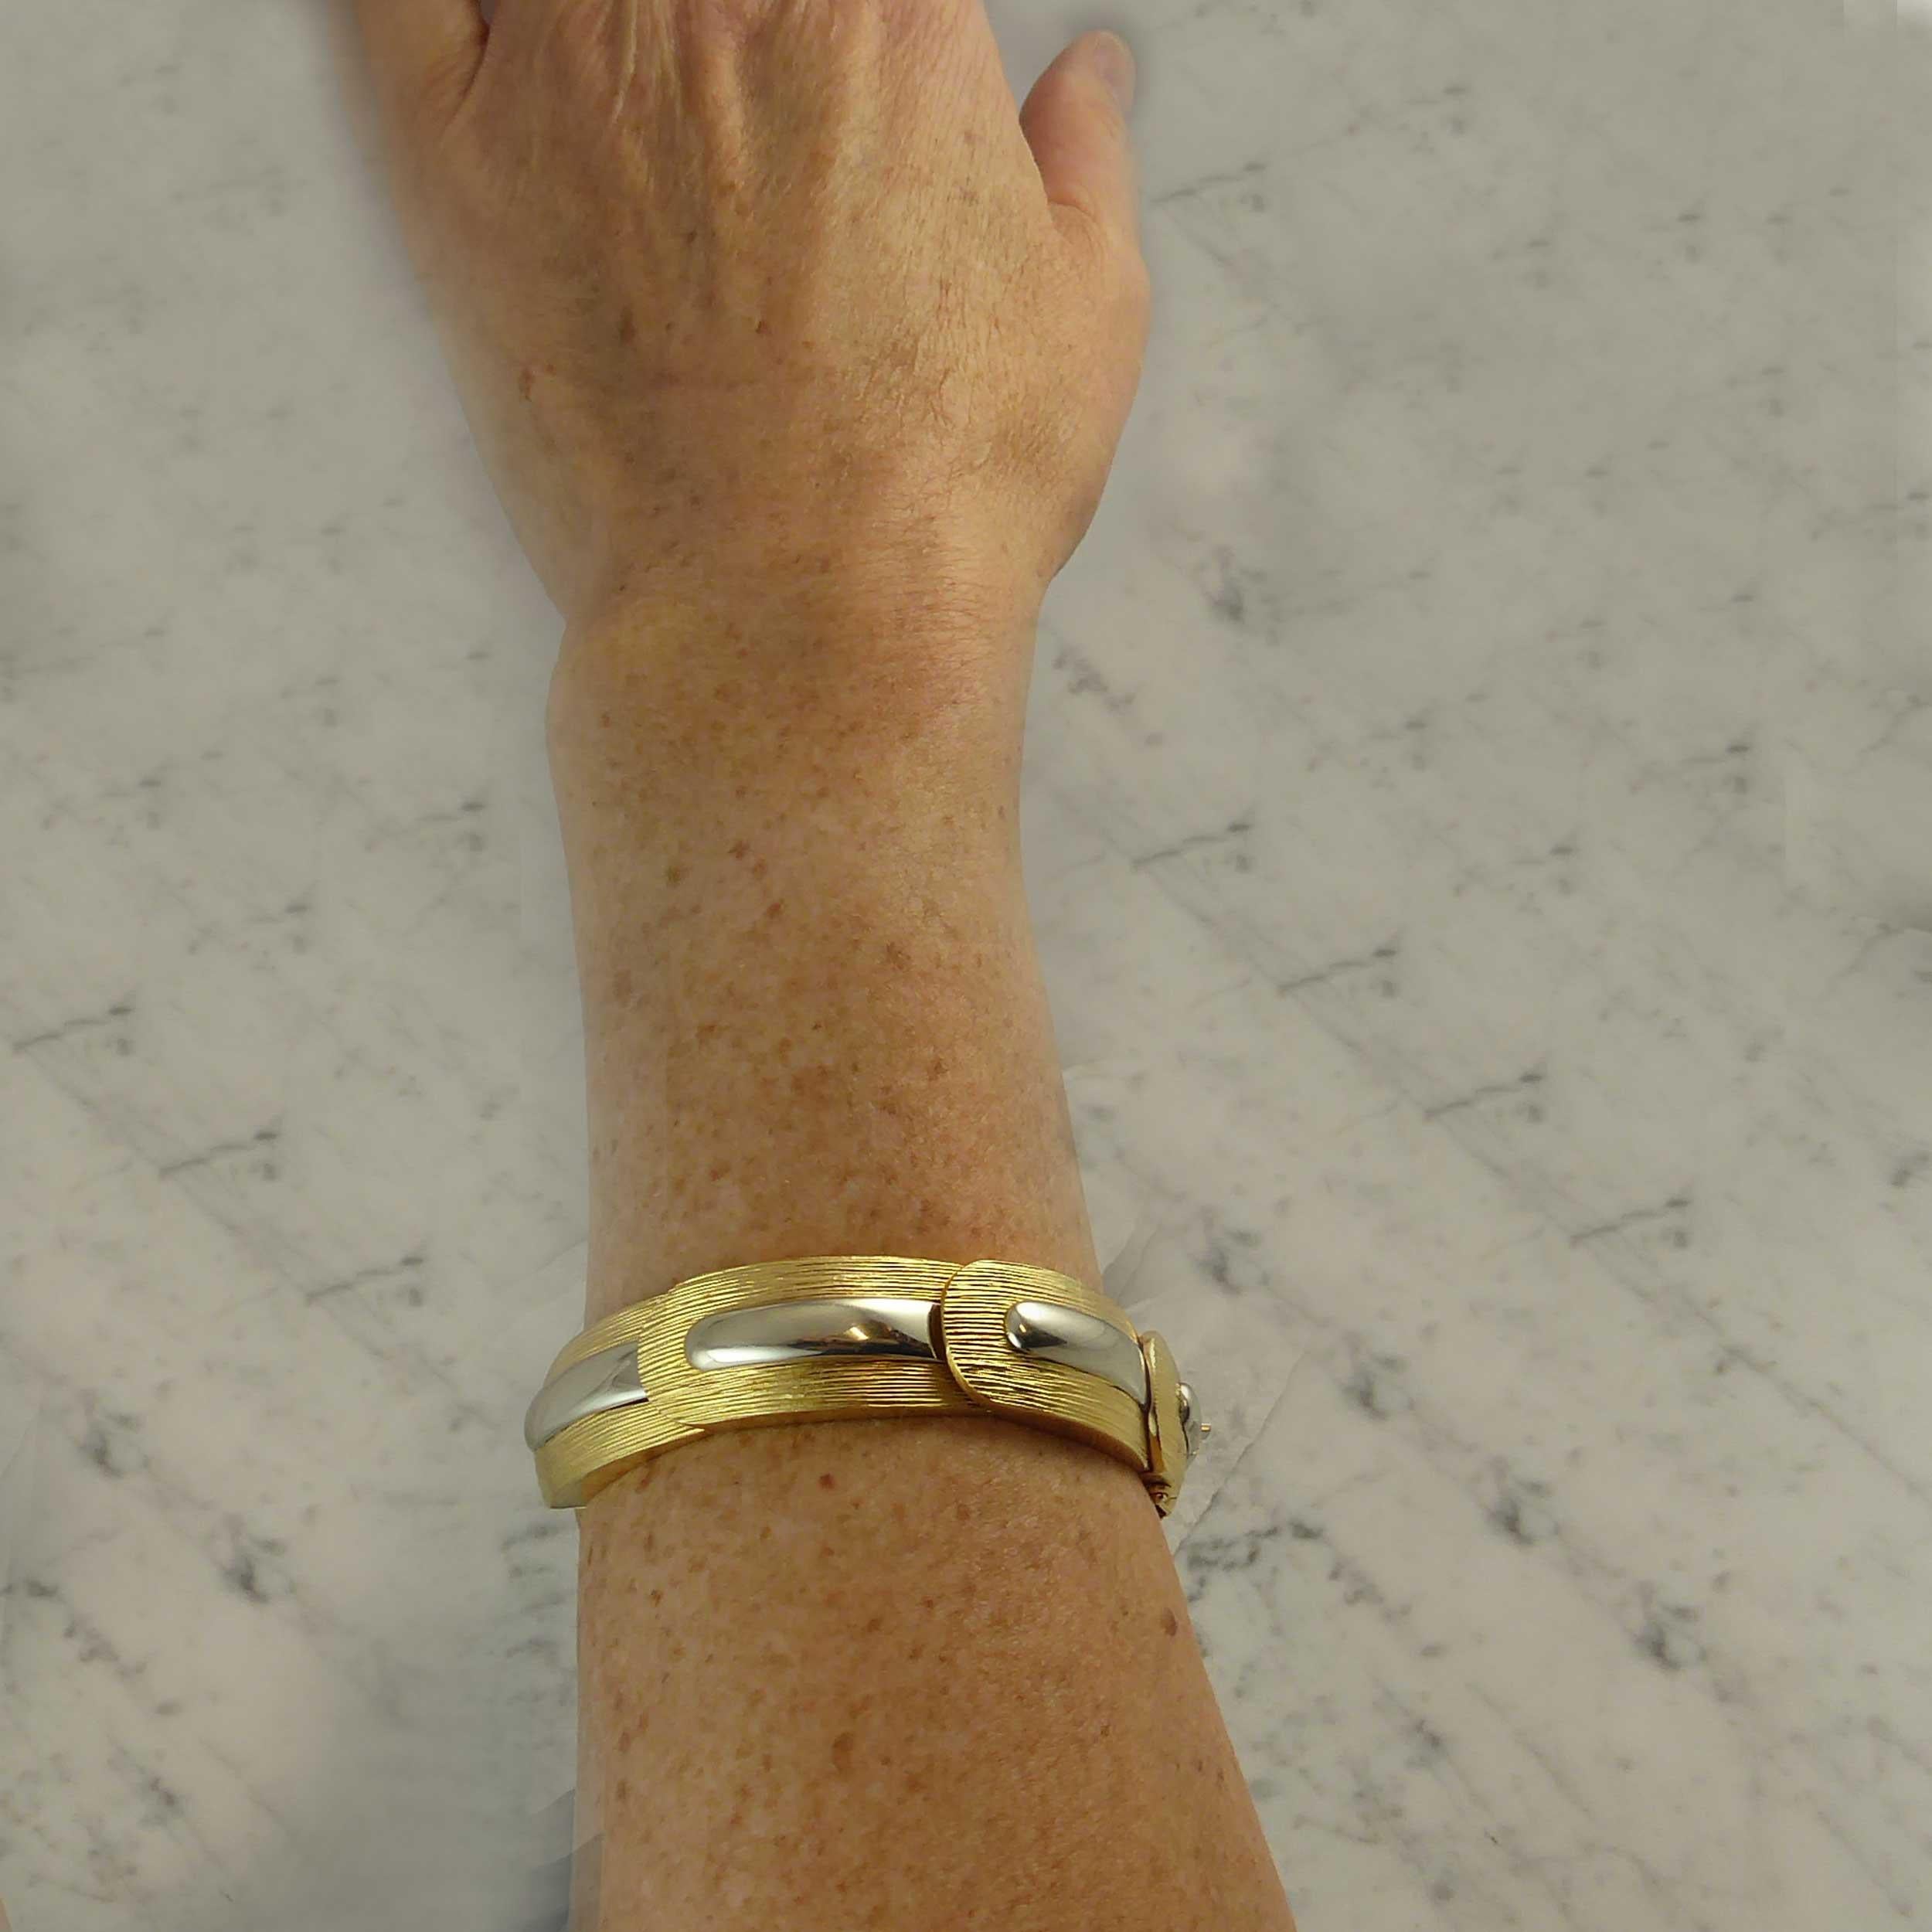 Vintage Designer Bracelet 1974, Lapponia Finland, Yellow and White Gold, Nordic For Sale 7